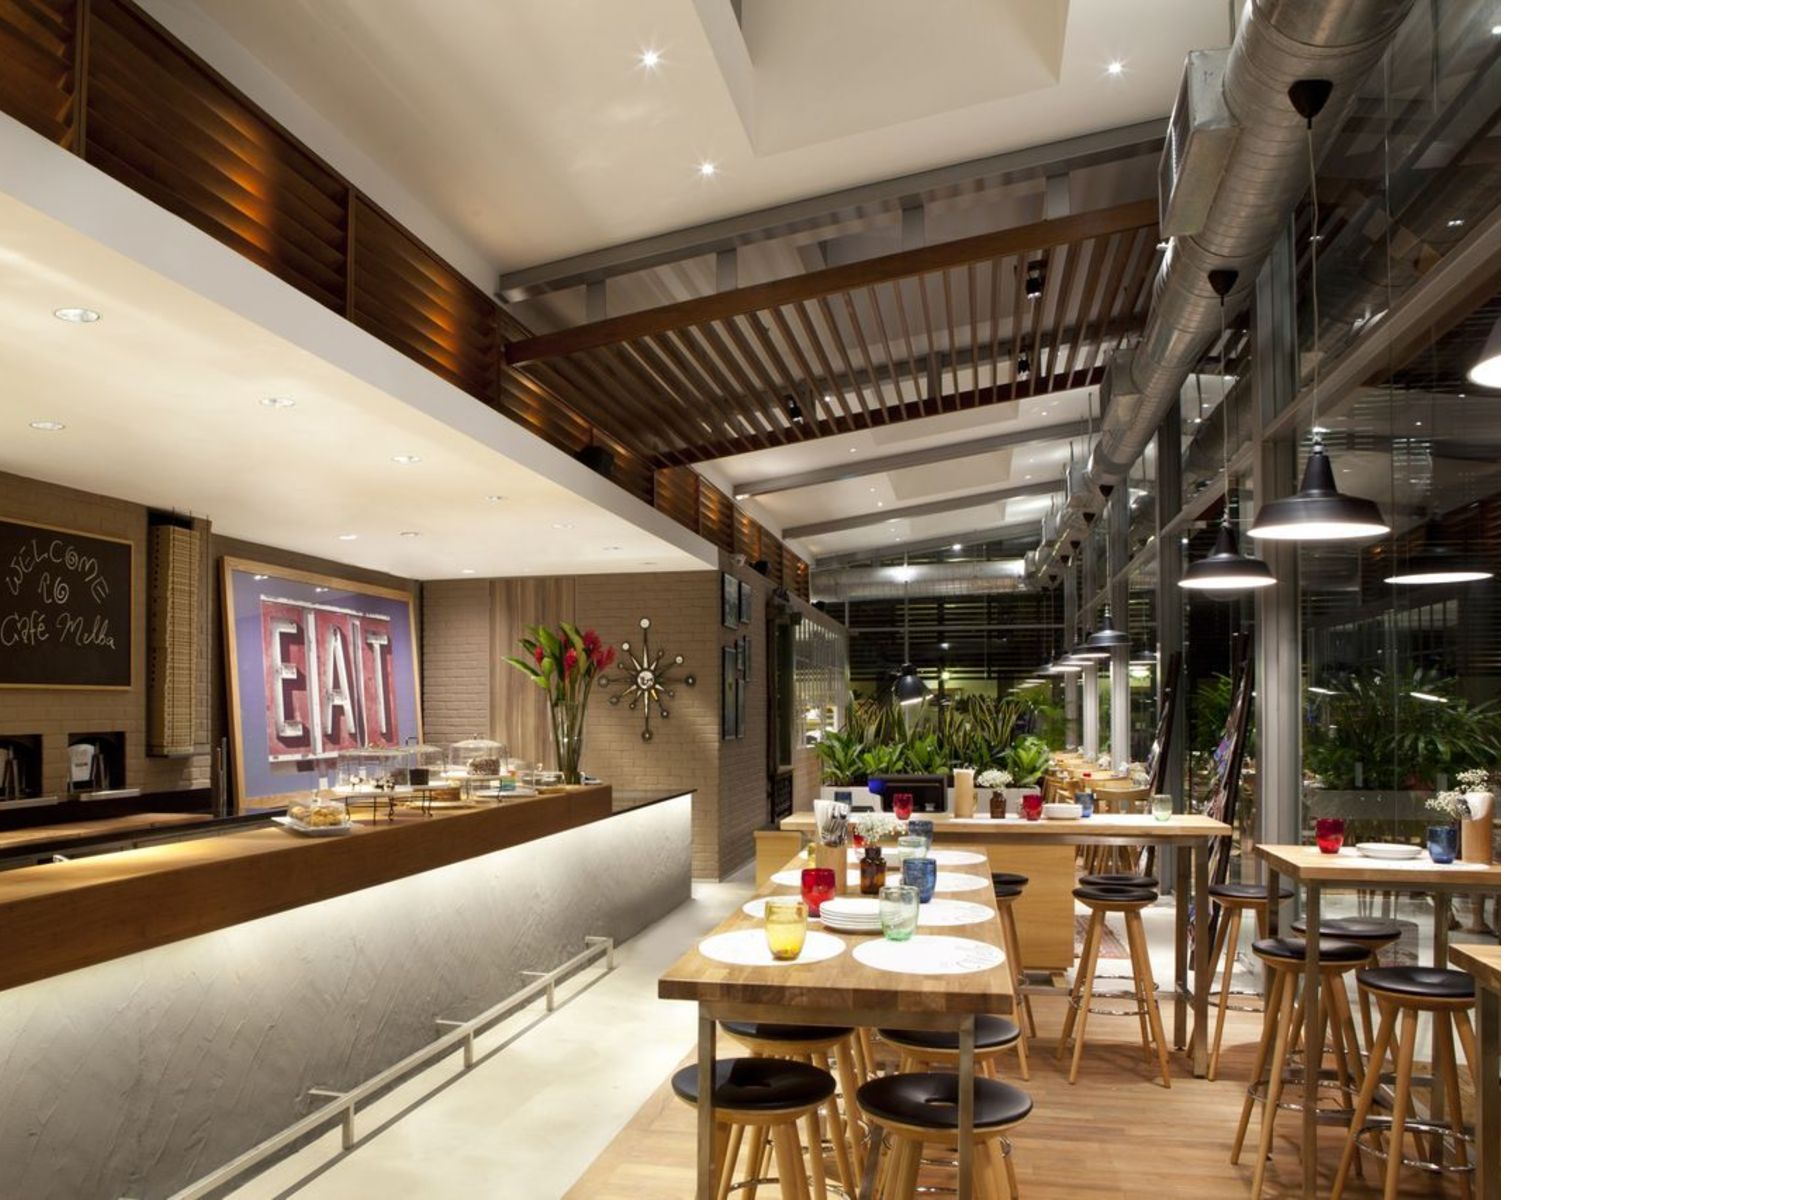  Cafe  Melba Singapore  Surrounded by greenery in the city 